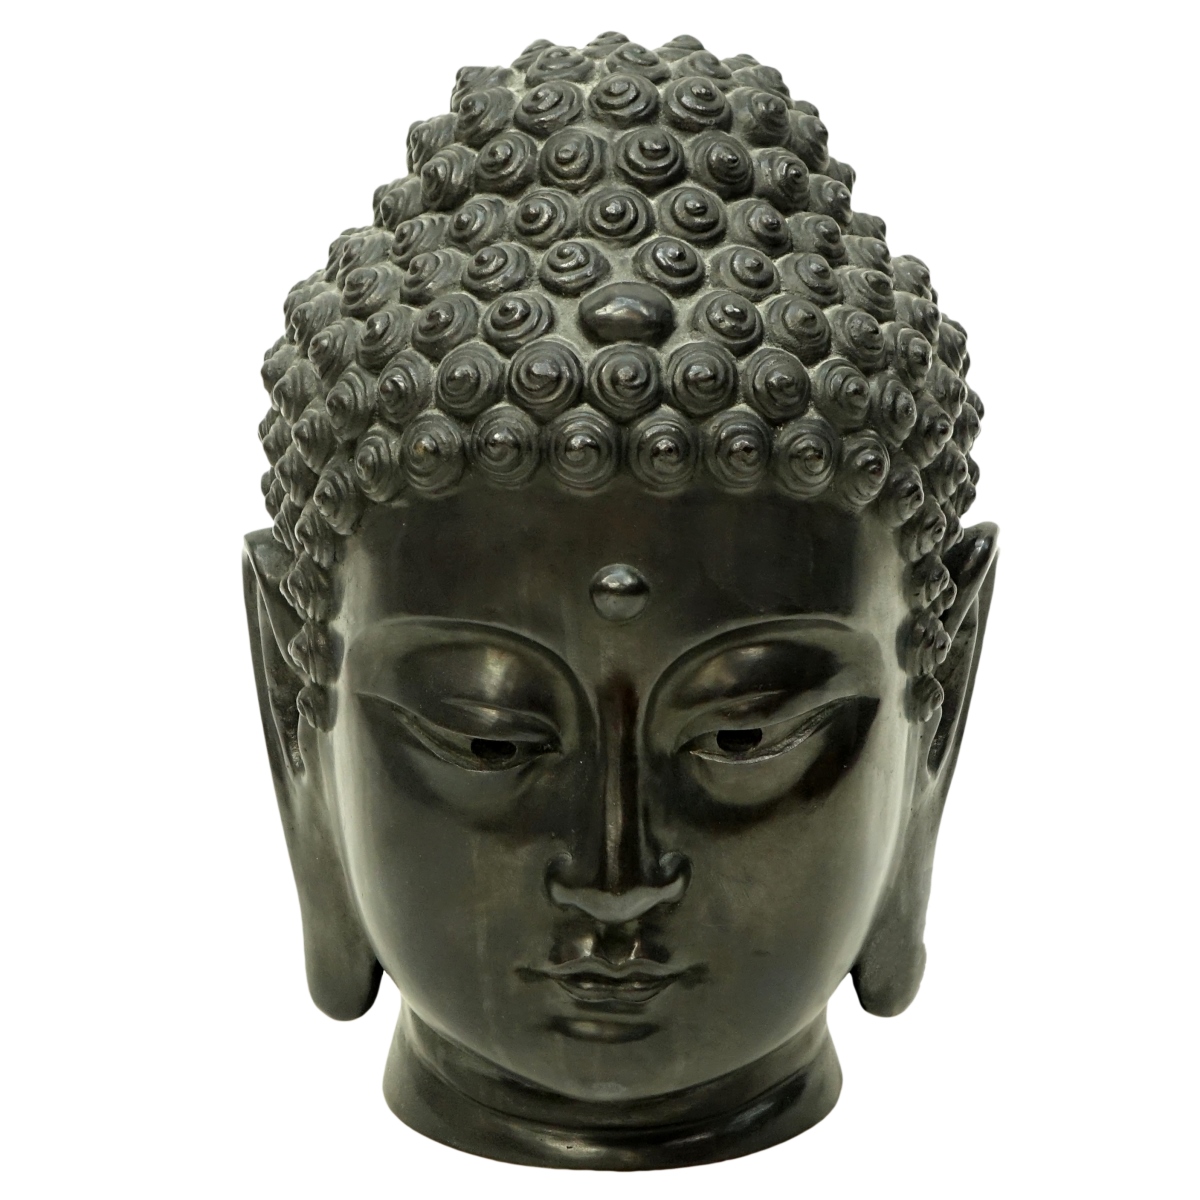 Bronze Sculpture Modeled After the Head of Buddha